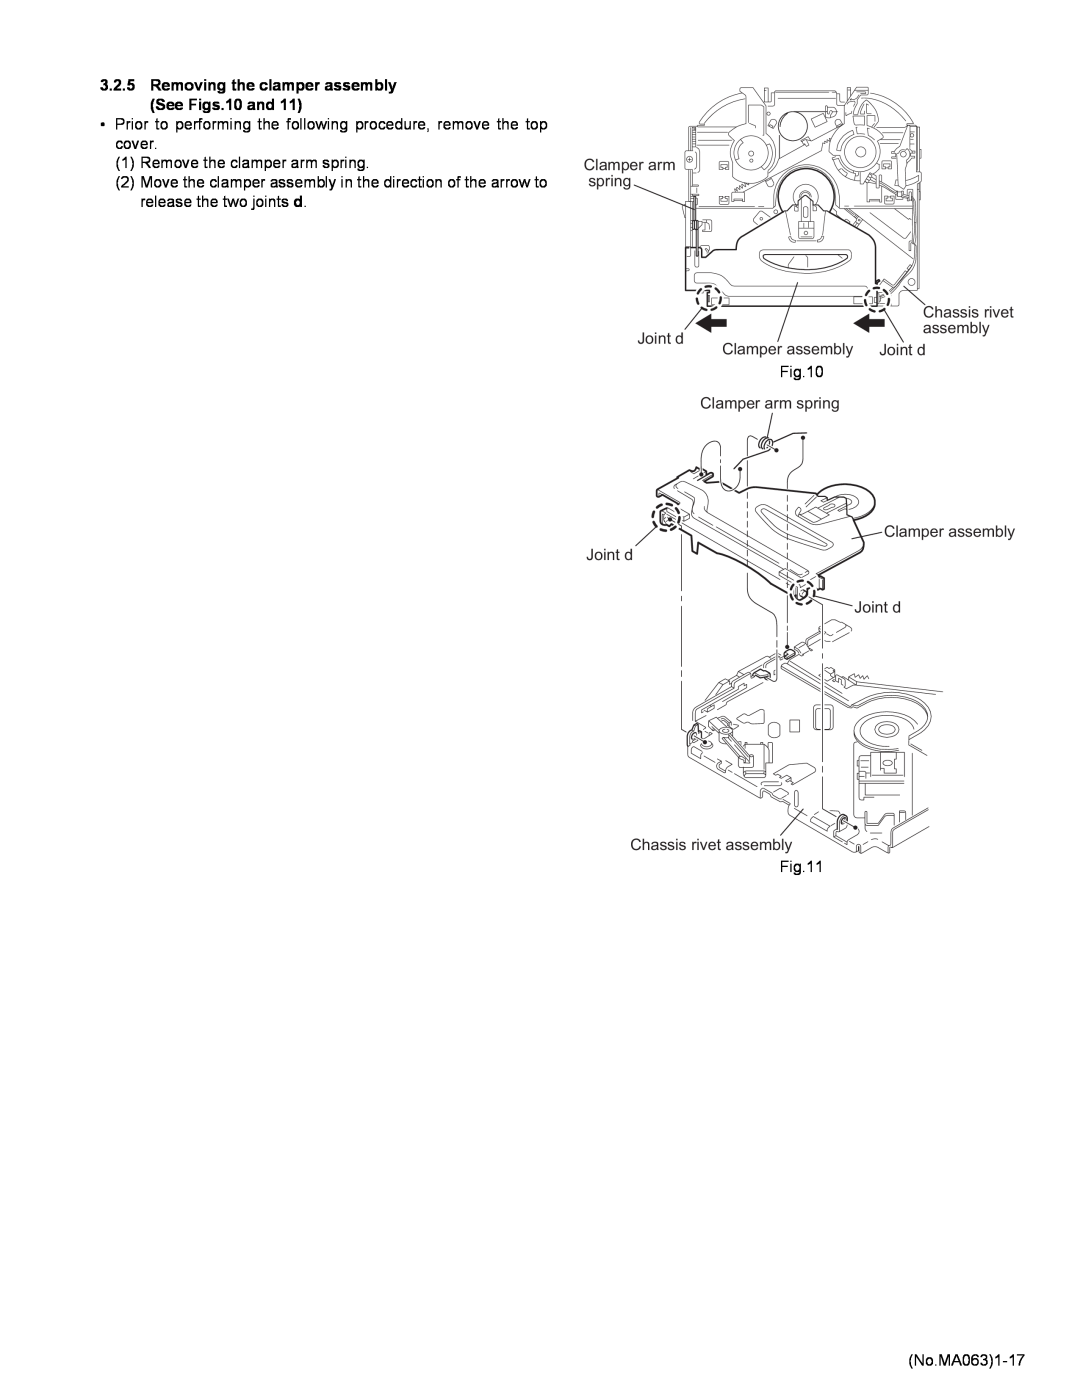 JVC KD-LH401 service manual Removing the clamper assembly See Figs.10 and 